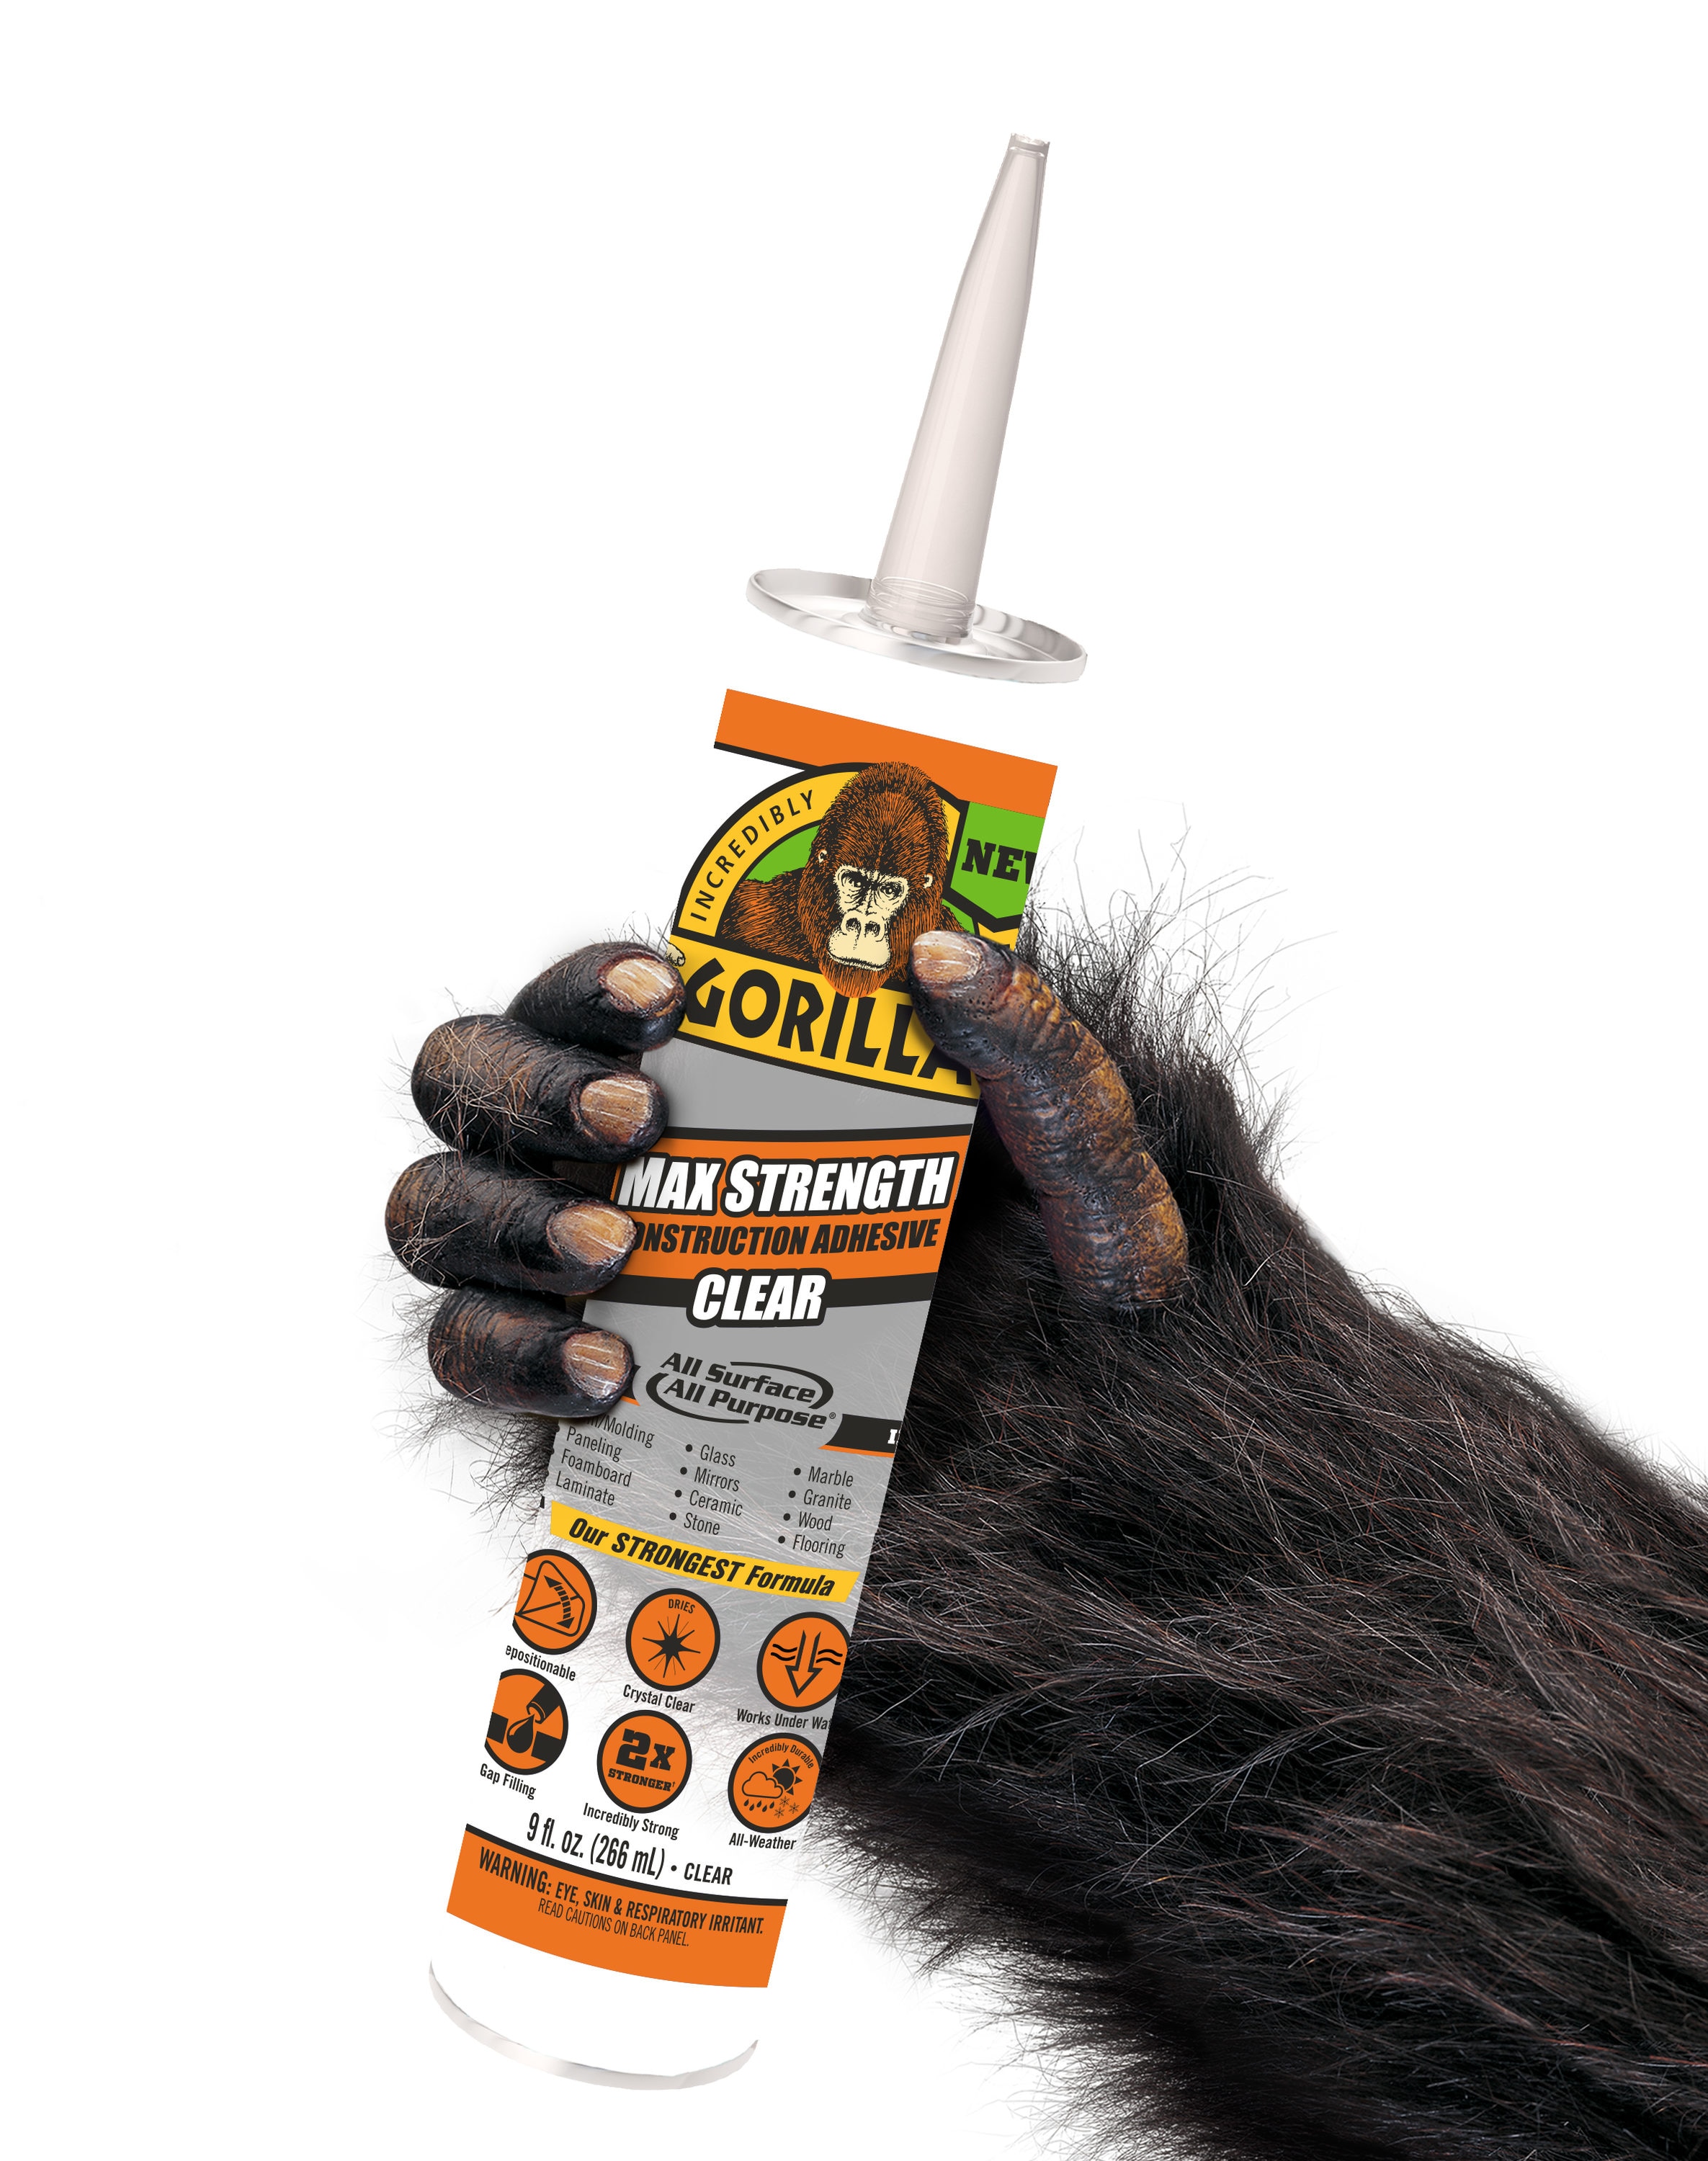 Gorilla Heavy Duty Spray Adhesive, Multipurpose and Repositionable, 4  Ounce, Clear - Set of 4